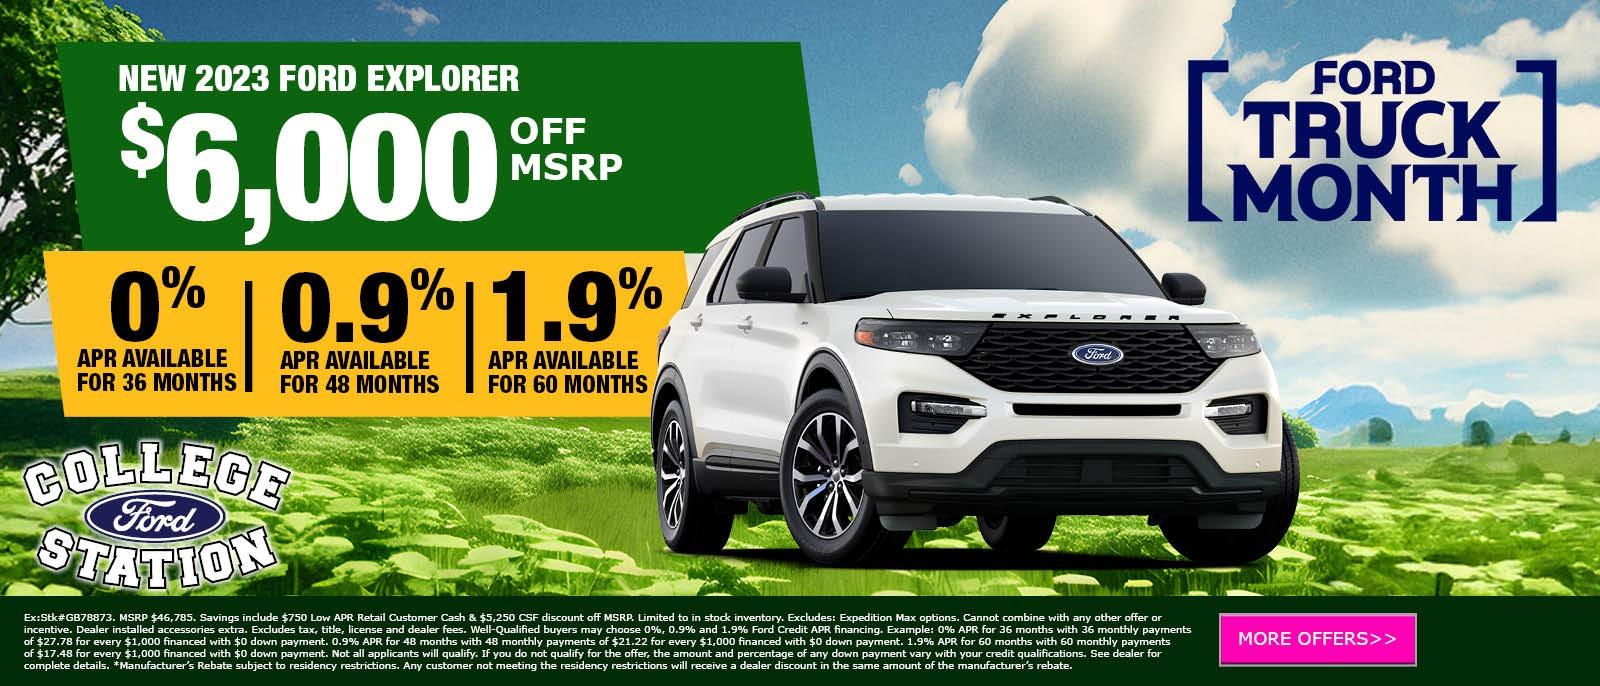 NEW 2023 FORD EXPLORER $6,000 OFF MSRP
0% APR AVAILABLE FOR 36 MONTHS
0.9% APR AVAILABLE FOR 48 MONTHS
1.9% APR AVAILABLE FOR 60 MONTHS